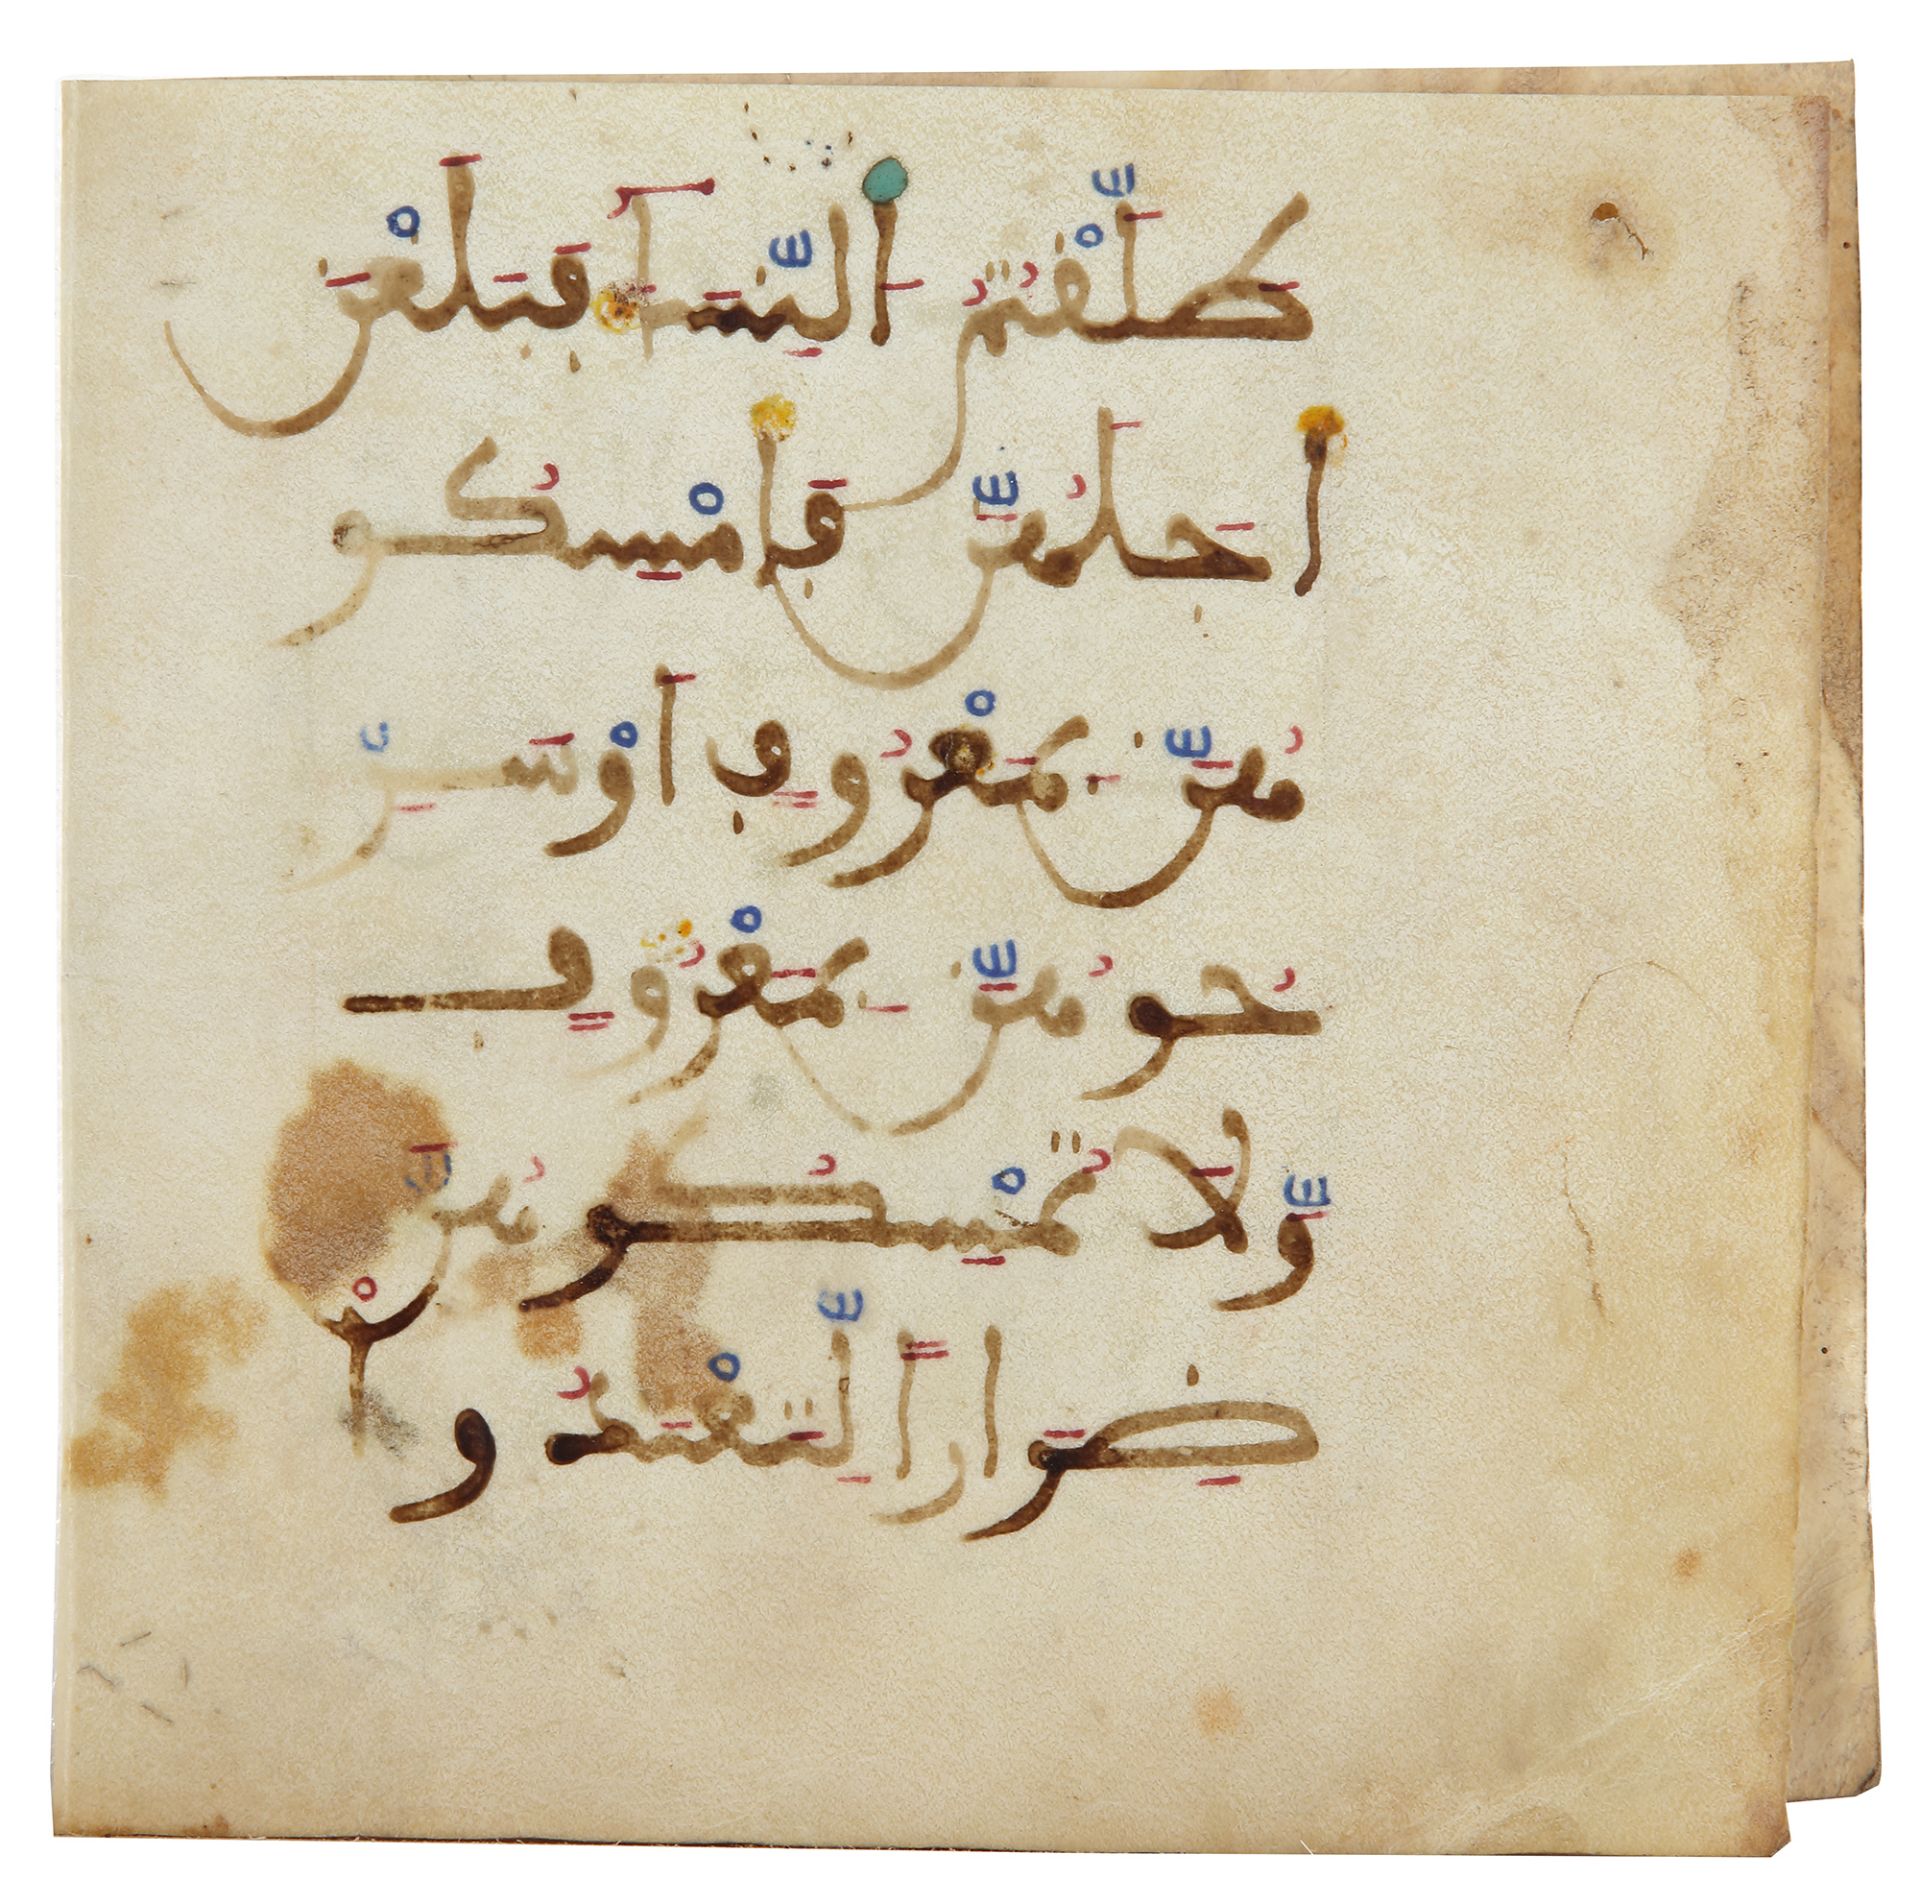 TWO MAGHRIBI QURAN FOLIOS, NORTH AFRICA OR ANDALUSIA, 12TH-13TH CENTURY - Image 2 of 3